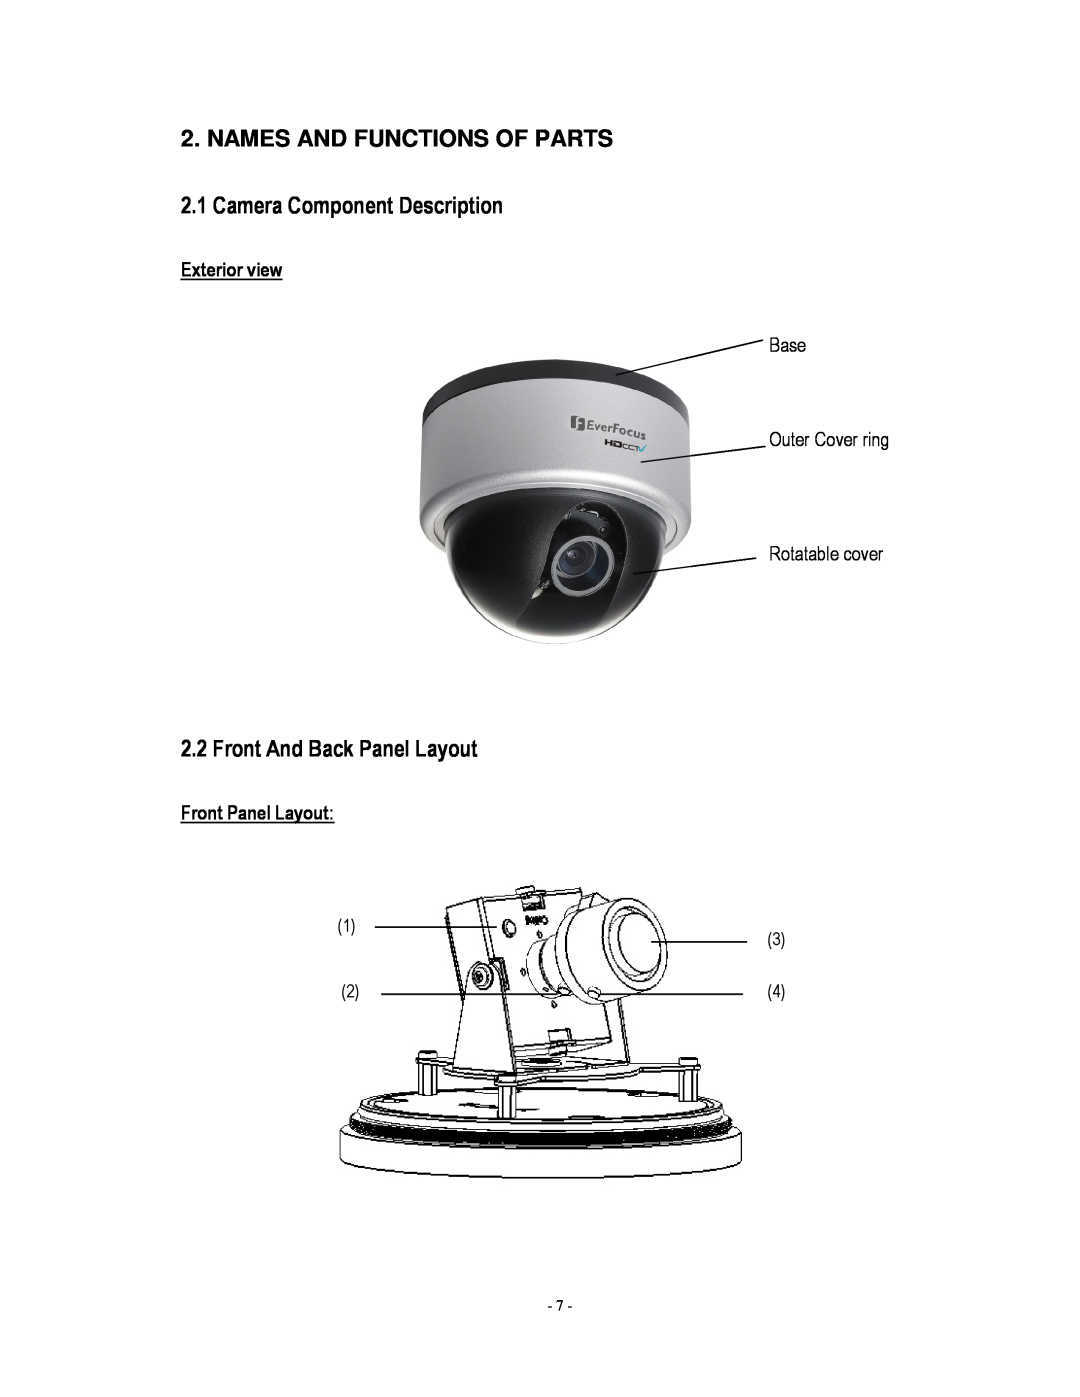 EverFocus EHH5200 specifications Names And Functions Of Parts, Camera Component Description, Front And Back Panel Layout 